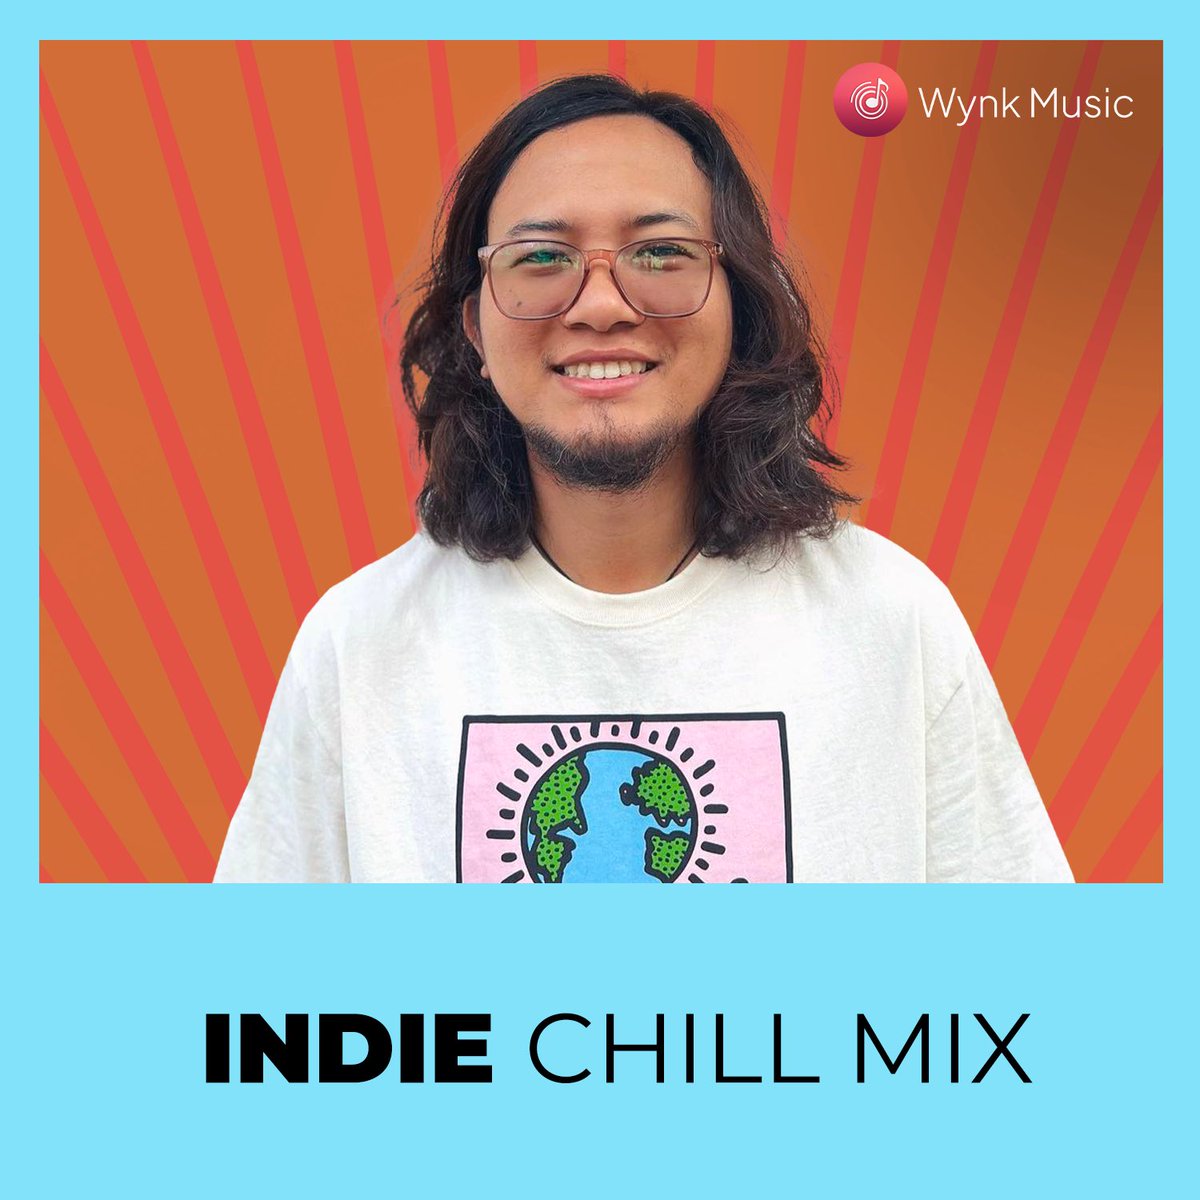 Time to kick in the soulful Friday vibes with the best of Indie melodies! 🎶 Dive into the sound of 'Udd Chala (In Nature)' by @tabachakewrites on @wynkmusic. 

Listen here: wynk.in/u/7kp8kv4vU 

#IndieChillMix #WynkMusic #IndieMusic #TabaChake #Indie #ListenNow